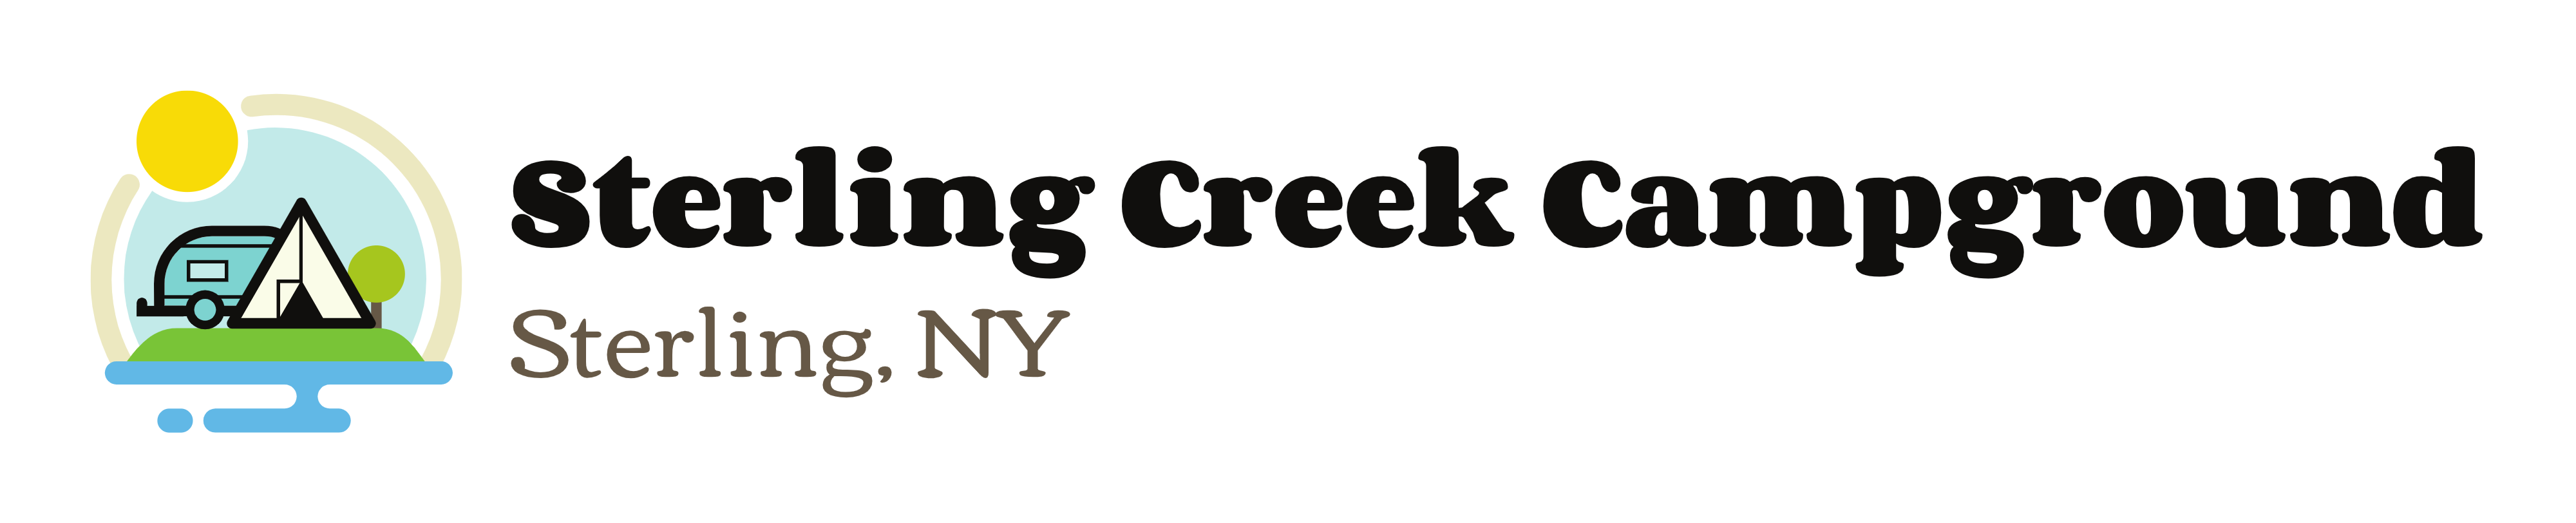 Sterling Creek Campground